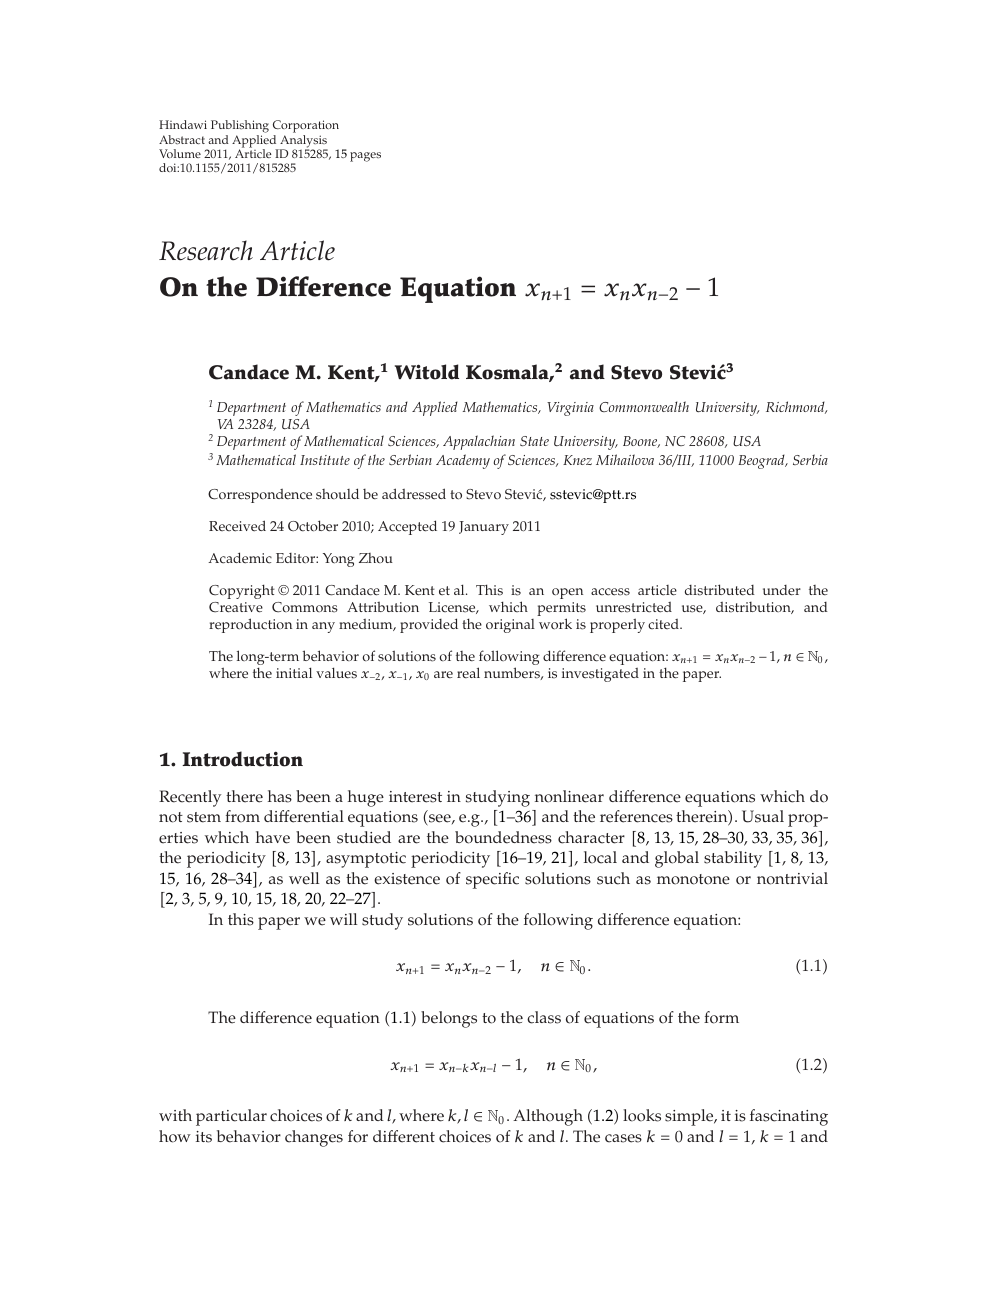 On The Difference Equation 𝑥𝑛 1 𝑥𝑛𝑥𝑛 2 1 Topic Of Research Paper In Mathematics Download Scholarly Article Pdf And Read For Free On Cyberleninka Open Science Hub